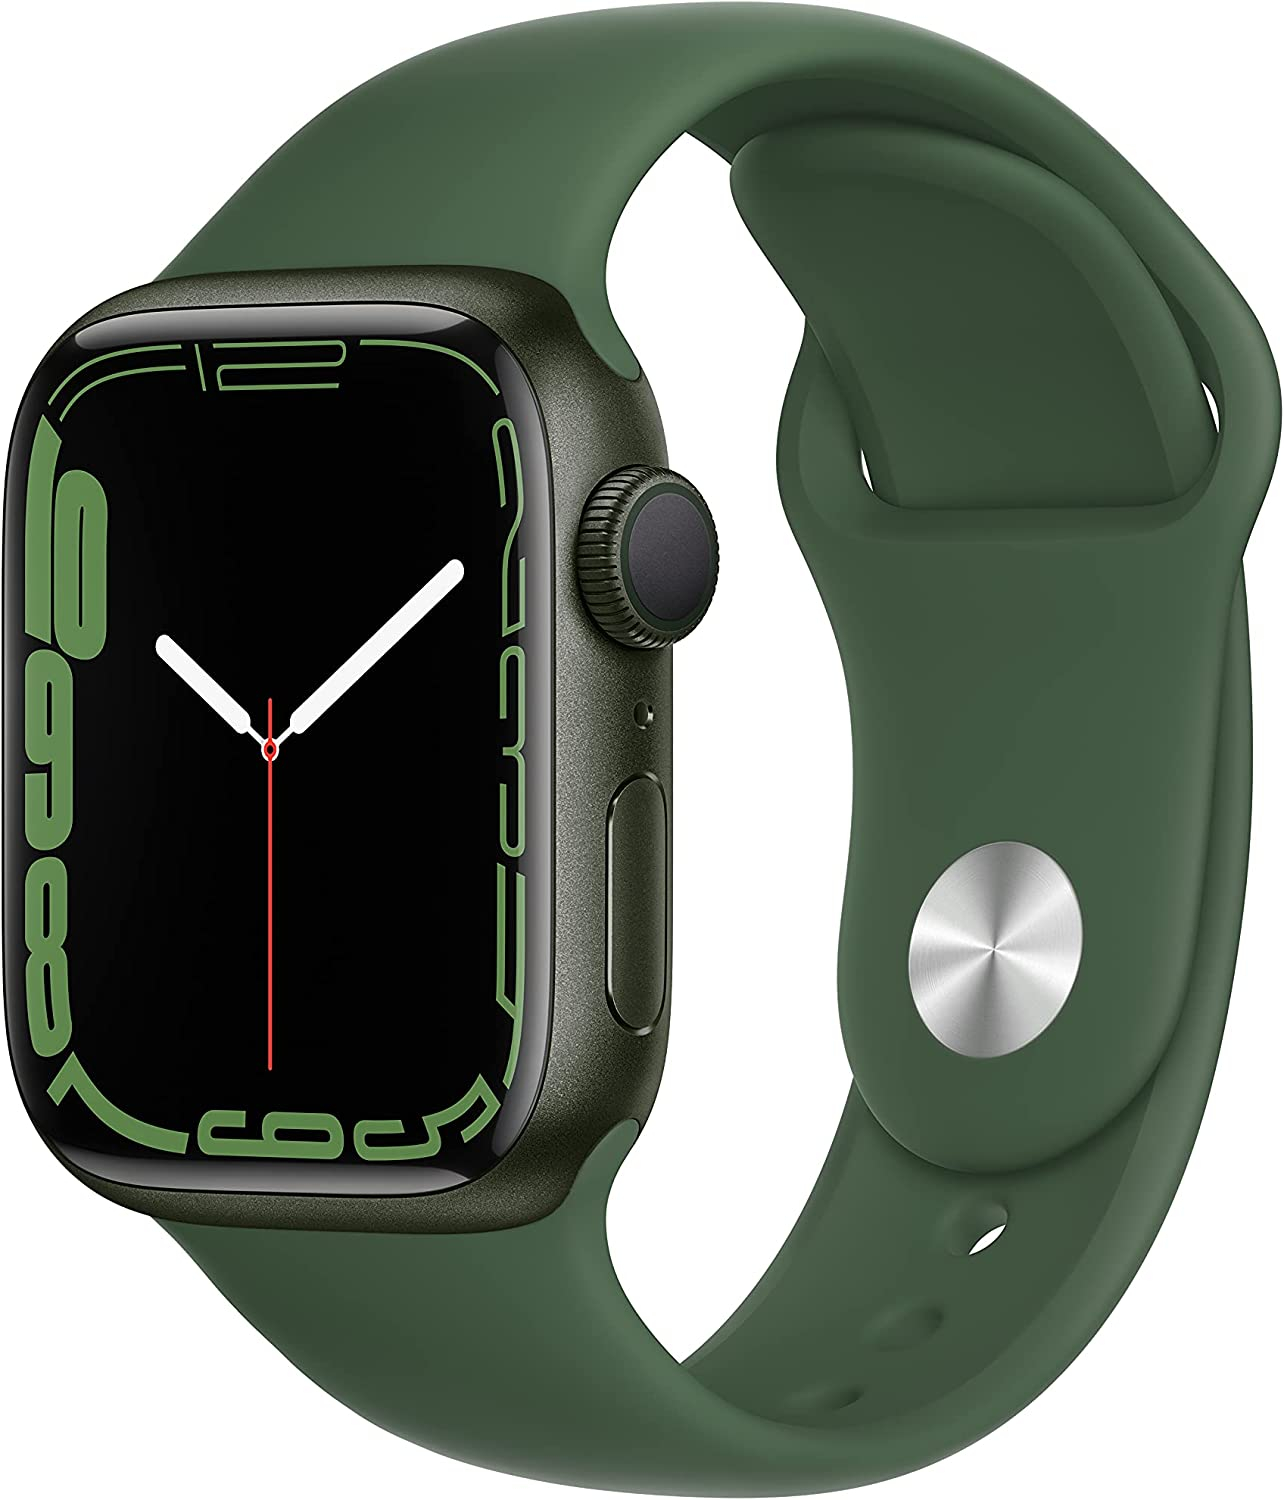 TrendingNews: Shop Black Friday Apple Watch deals right now - prices